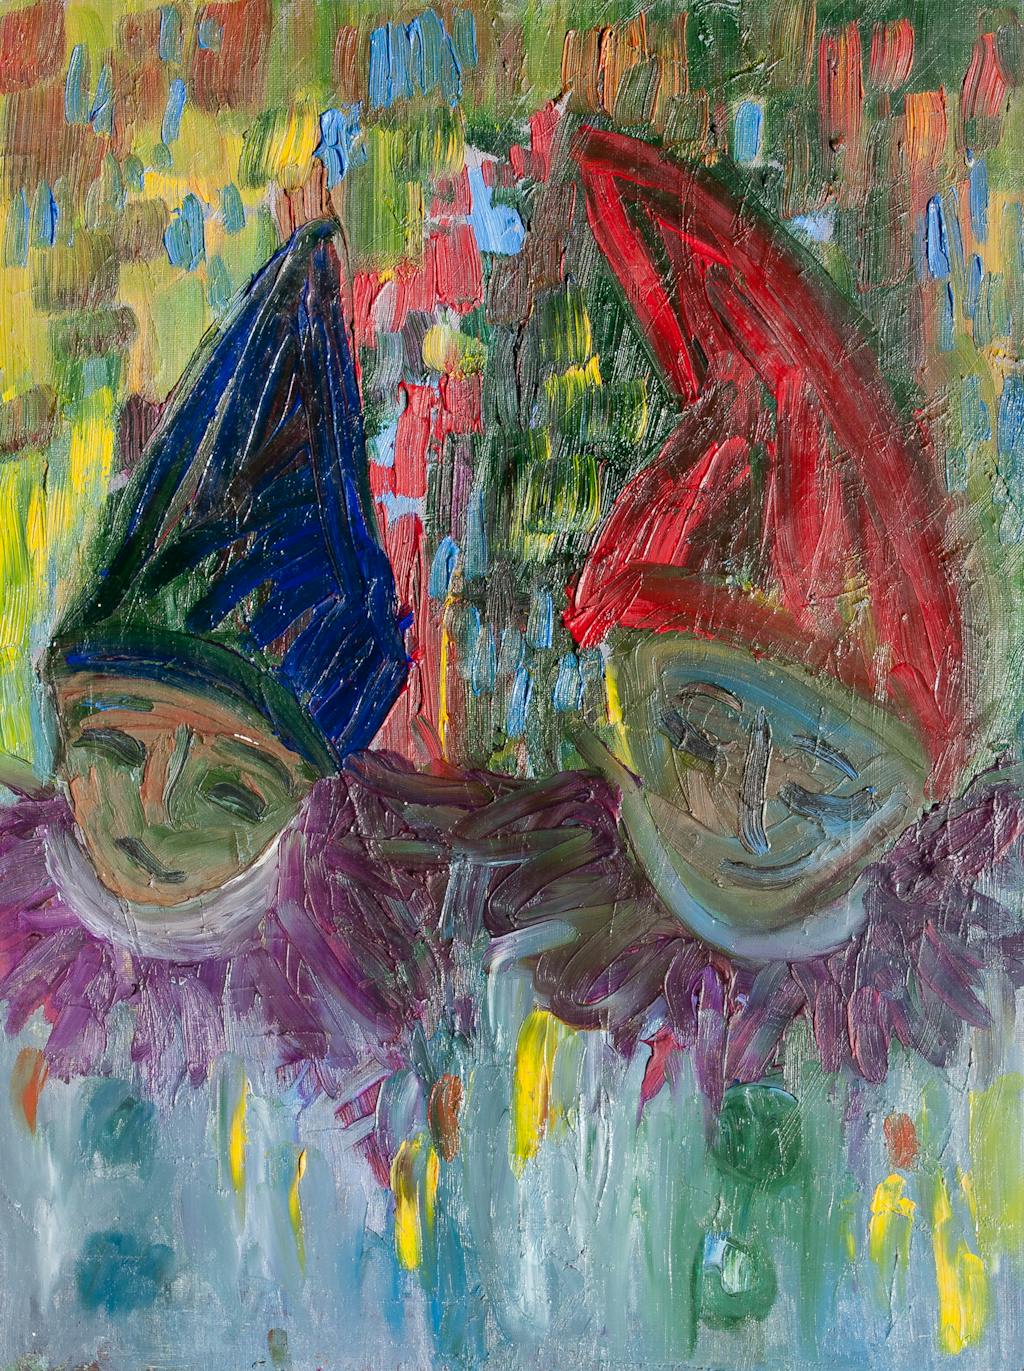 Painting "Two clowns", painted by Elena Birkenwald in 2003